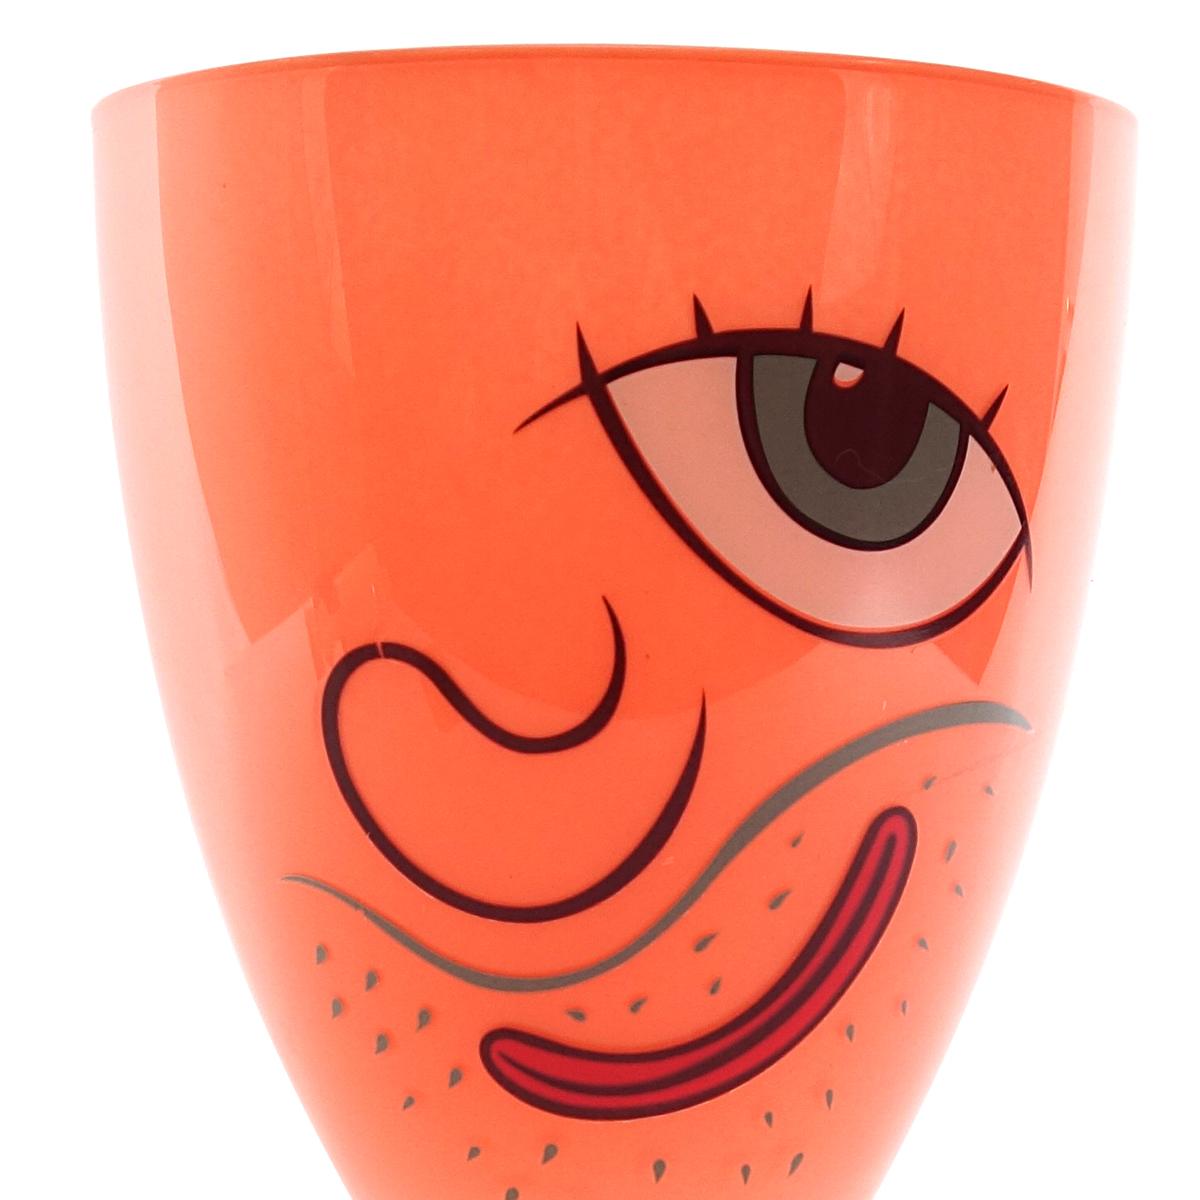 Cheerful glass vase designed by Massimo Giacon for the Vis-à-vis Collection of Ritzenhoff, 1999.

The stubble rowdy face looks at us in a somewhat challenging but also friendly manner. There is a surreal touch to it due to the missing second eye.